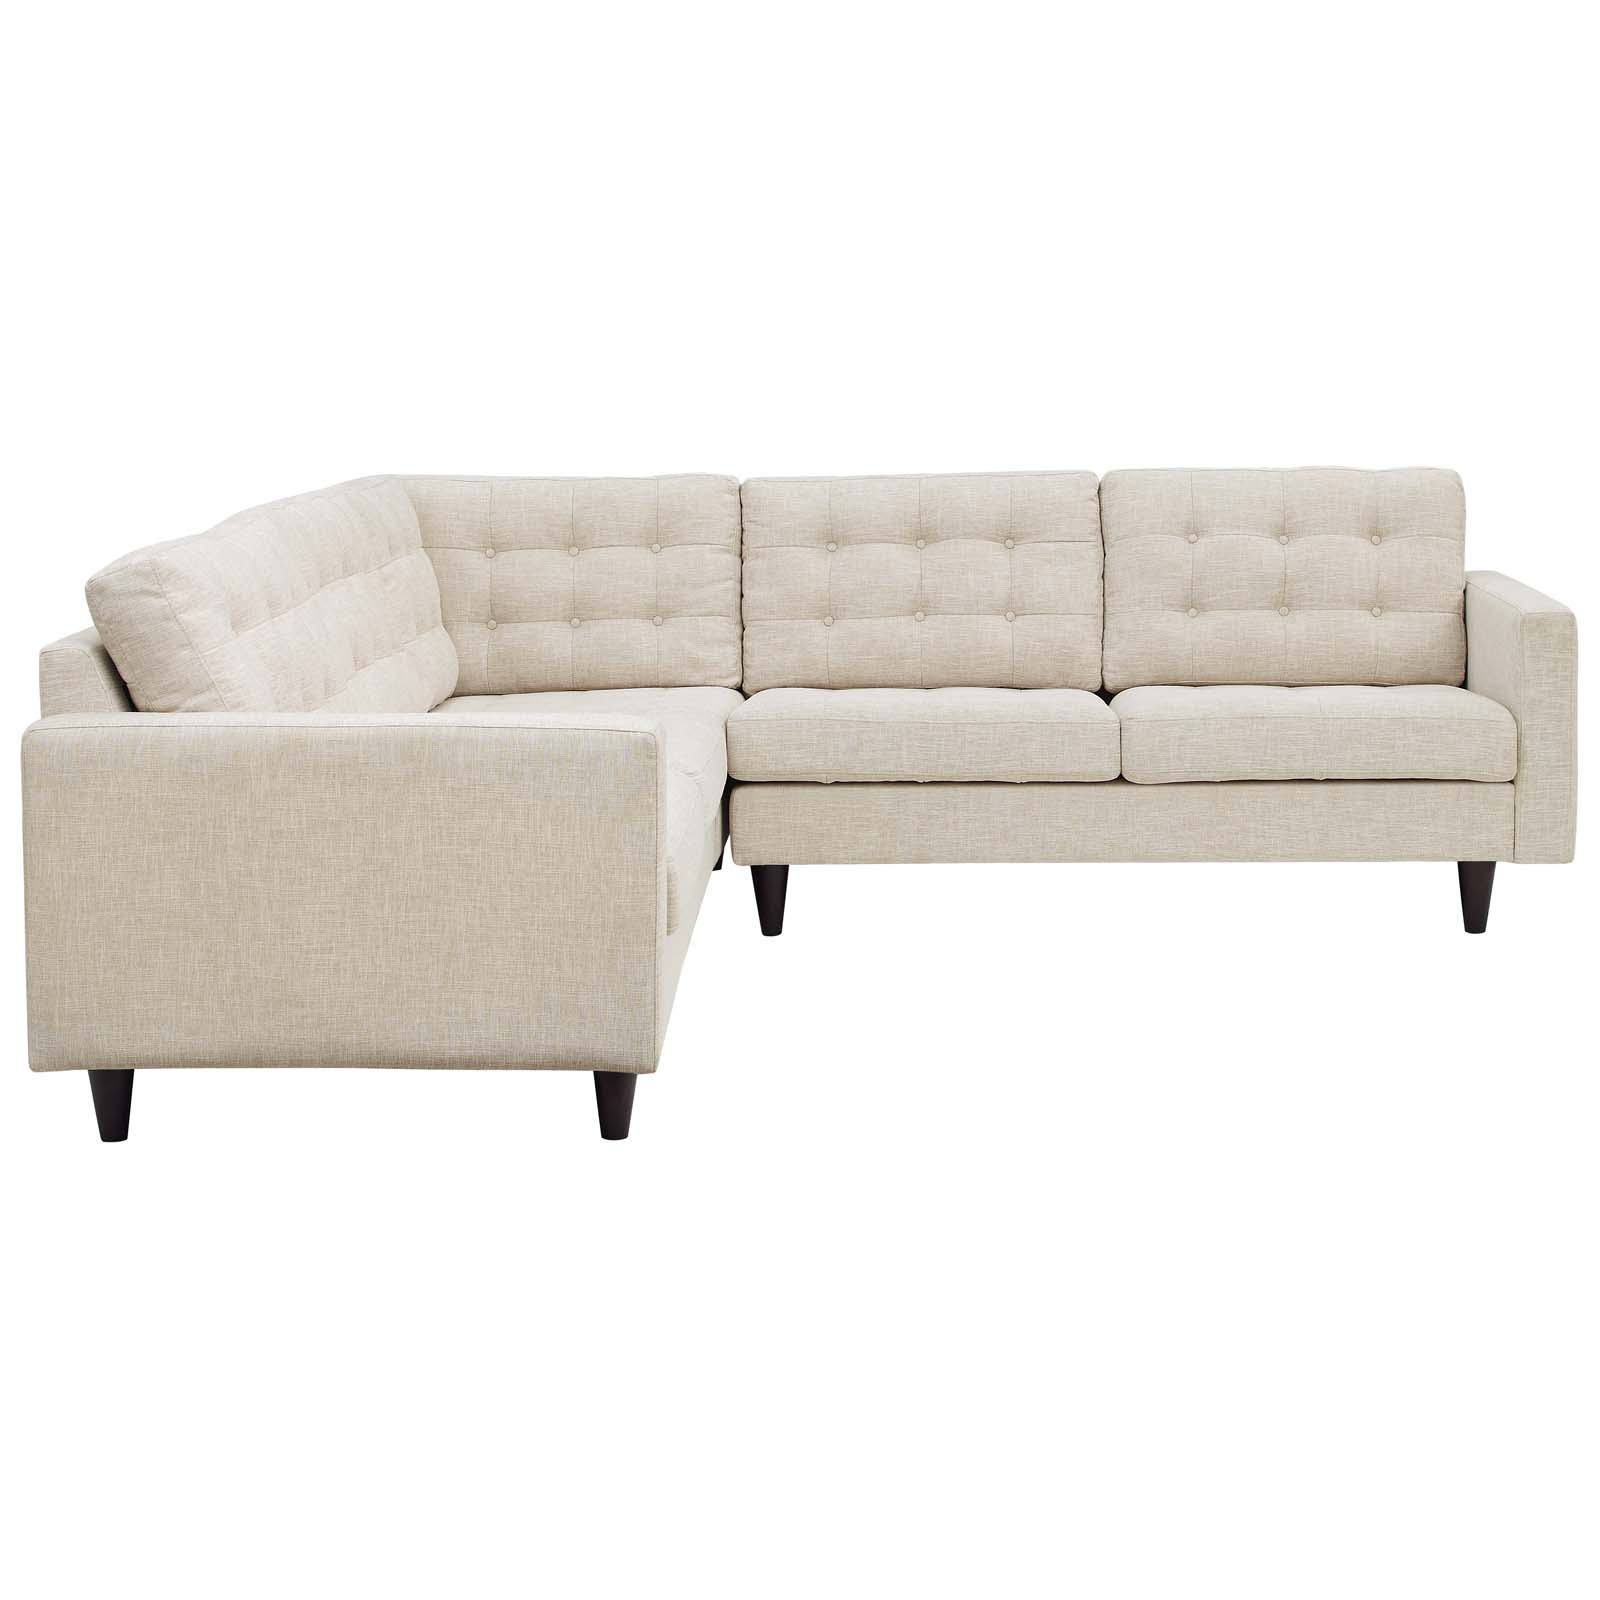 Empress 3 Piece Upholstered Fabric Sectional Sofa Set Beige by Modway